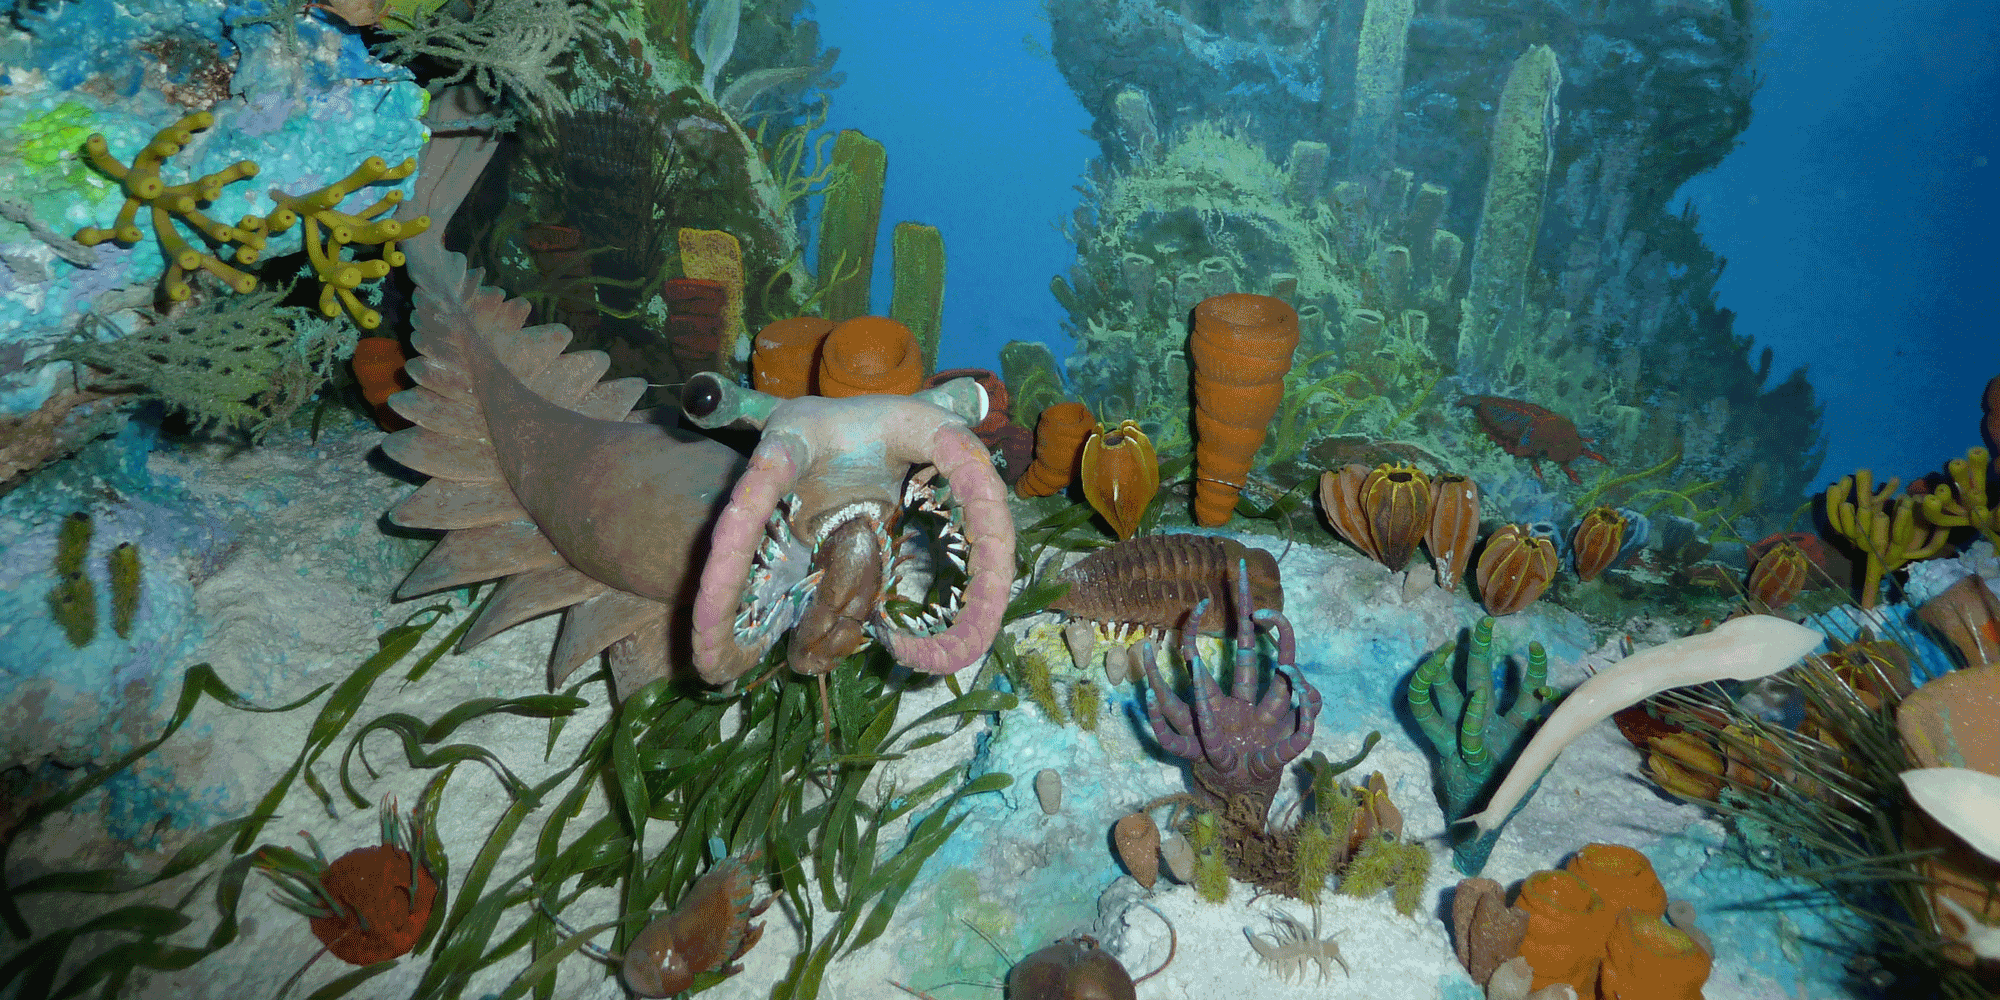 Photograph of a diorama depicting a Cambrian marine ecosystem.